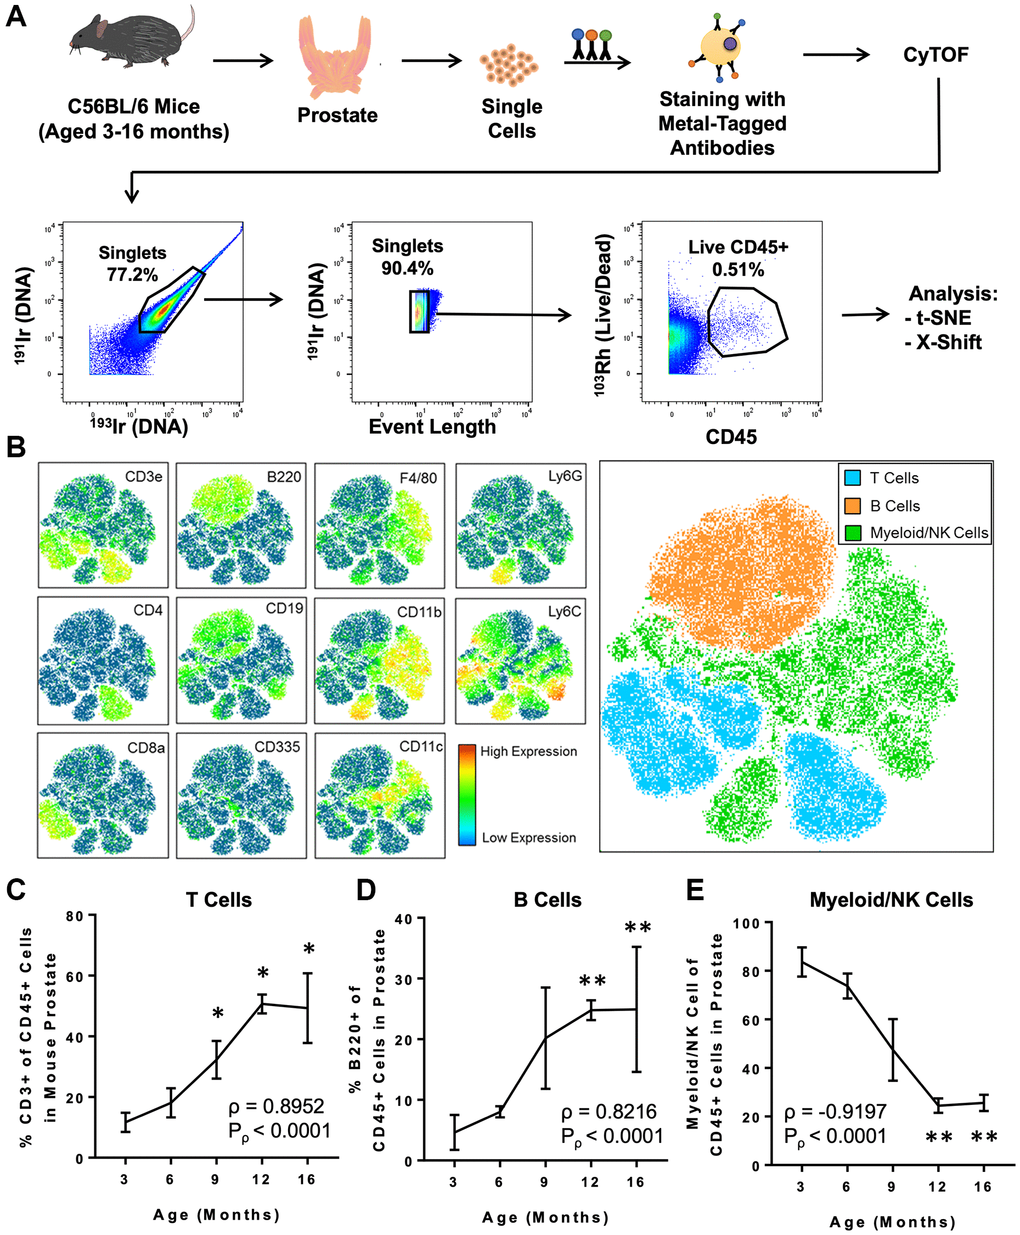 CyTOF immunophenotyping of the aging mouse prostate. (A) Workflow for prostate immunophenotyping using CyTOF. Mouse prostates of different ages were isolated, dissociated to single cells, and stained with a panel of metal-tagged antibodies before data acquisition via mass cytometry. Bivariate plots show gating for single, live CD45+ immune cells before analysis using clustering algorithms (t-SNE and X-Shift). Percentages represent the fraction of events that are within the gate in each bivariate plot. 191Ir/193Ir labels DNA of all cells to distinguish singlets from doublets. 103Rh labels DNA of dead cells. This flowchart was adapted from a previous publication from our group [12]. (B) t-SNE plot generated from the immune cells from mouse prostate, bladder, and kidney. Left: Heat maps showing expression of selected lineage markers by immune cells clustered using t-SNE. See Supplementary Figure 2A for the full set of markers. Right: t-SNE plot separated into 3 broad groups of immune cells (T cells, B cells, and myeloid/NK cells). (C–E) Quantification of changes to the mouse prostate immune cell composition during adult aging for CD3+ T cells (C), B220+ B cells (D), and myeloid/NK cells (E). Spearman correlation coefficient (ρ) and associated p-value (Pρ) represent the correlation between % immune cell type and age. Data represents mean ± SD of 4 biological replicates at each age. Kruskal-Wallis, p *p **p 